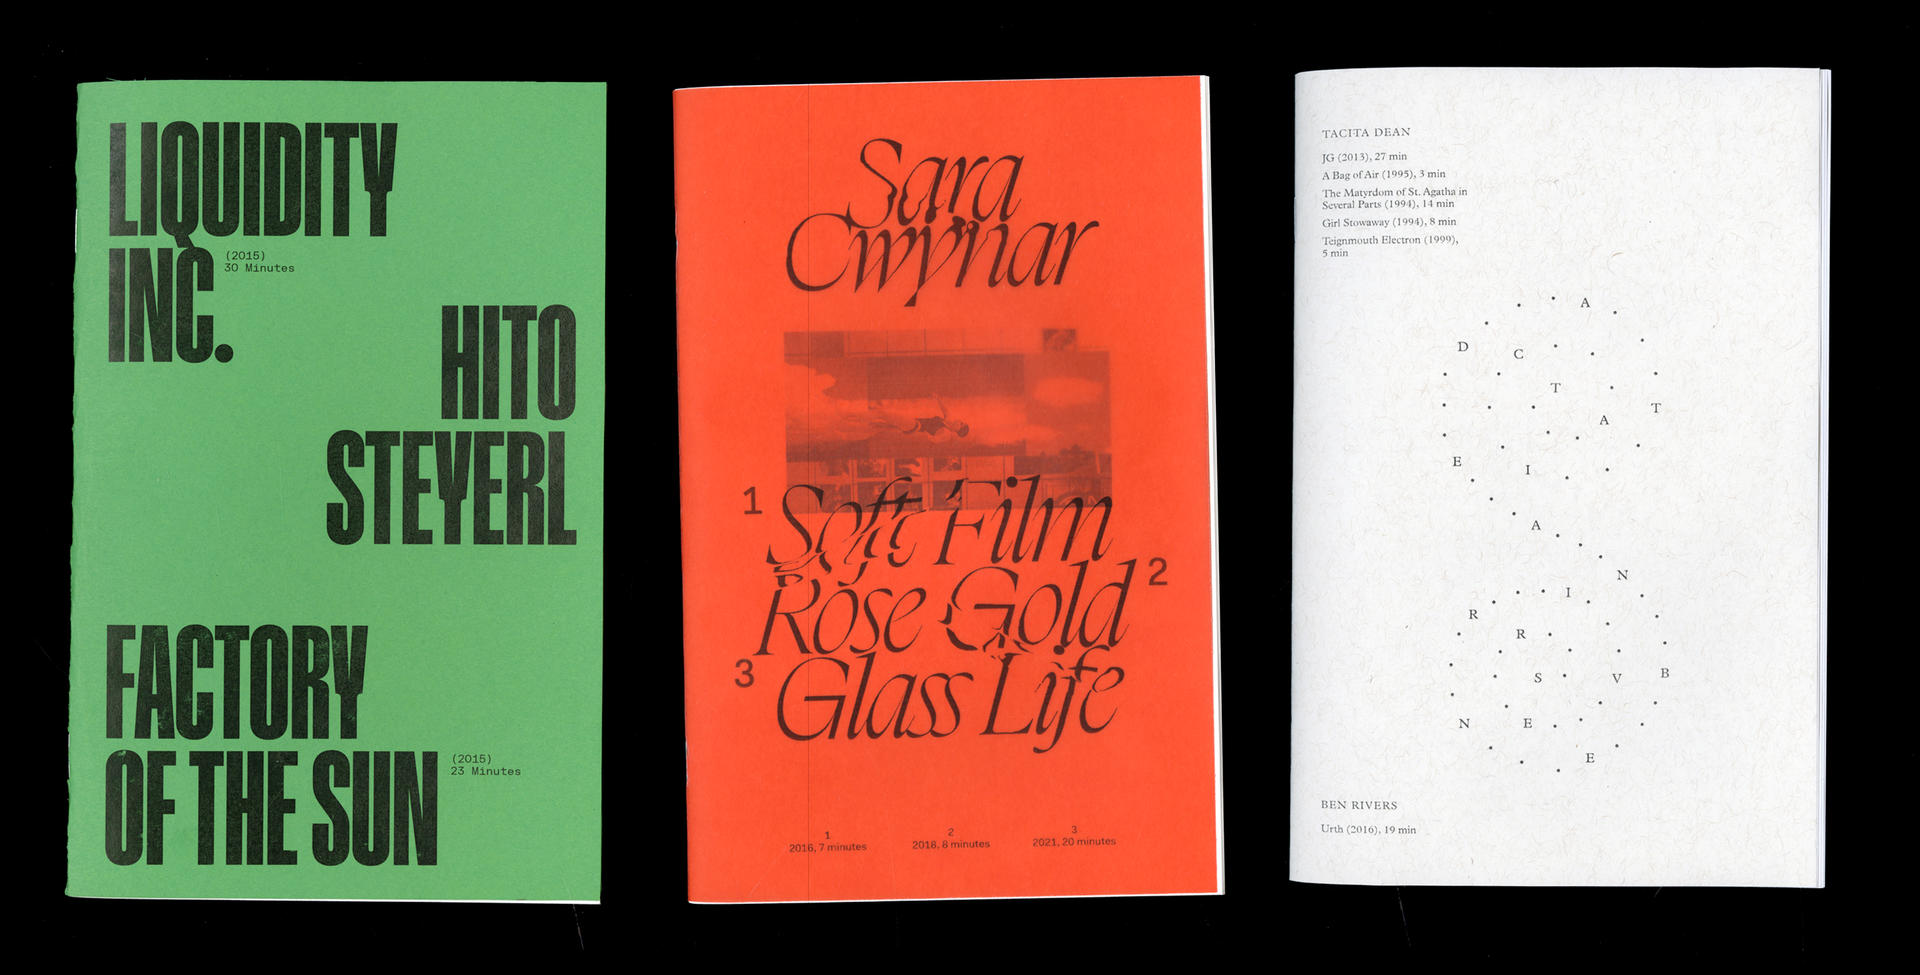 Three covers of half-letter-sized publications for three artists: Hito Steyerl, Sara Cwynar, and Tacita Dean